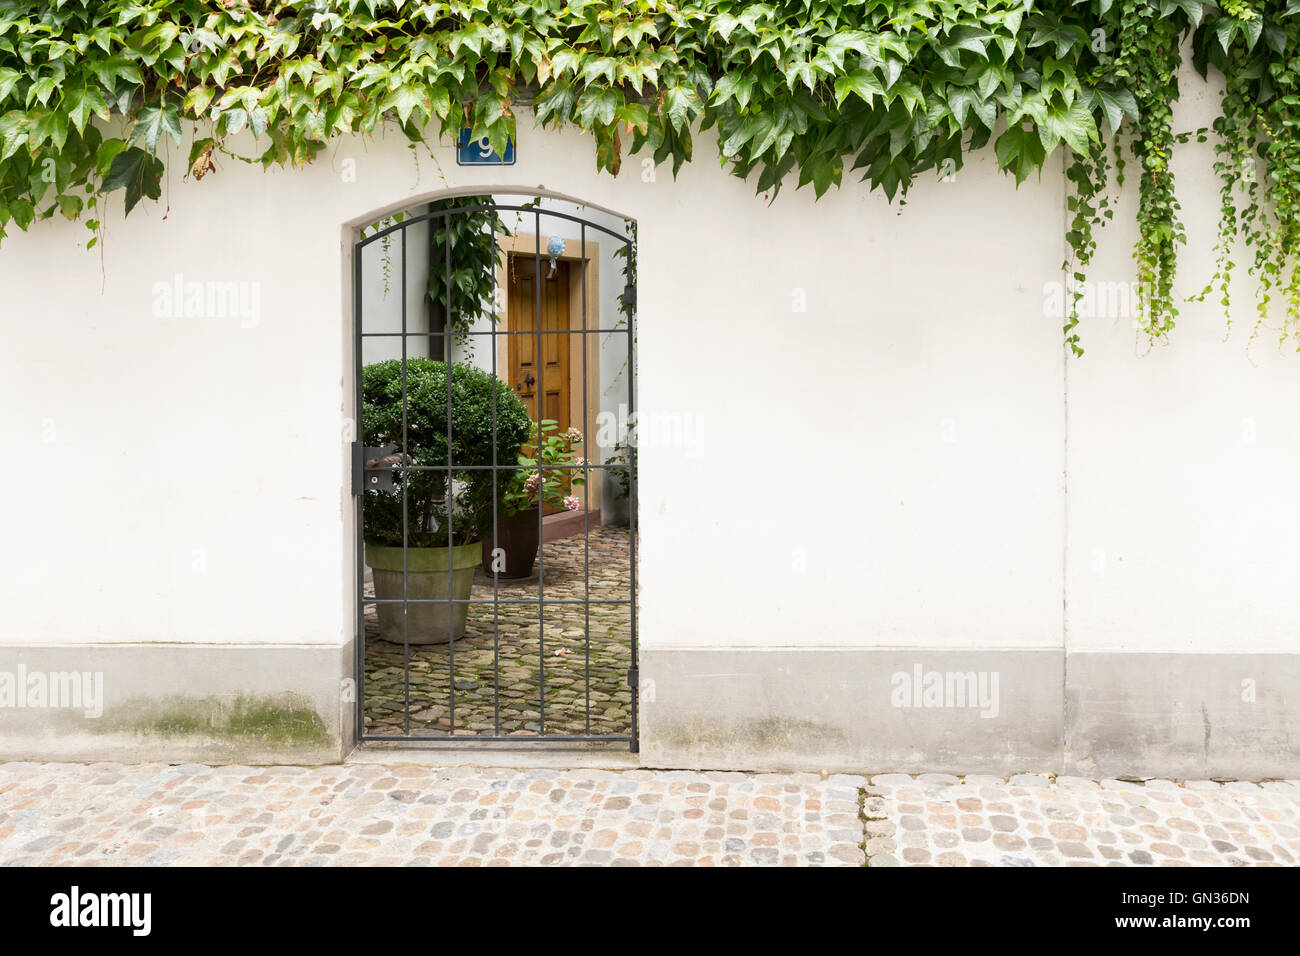 View through a gate with metal bars inside a cute little courtyard. Stock Photo